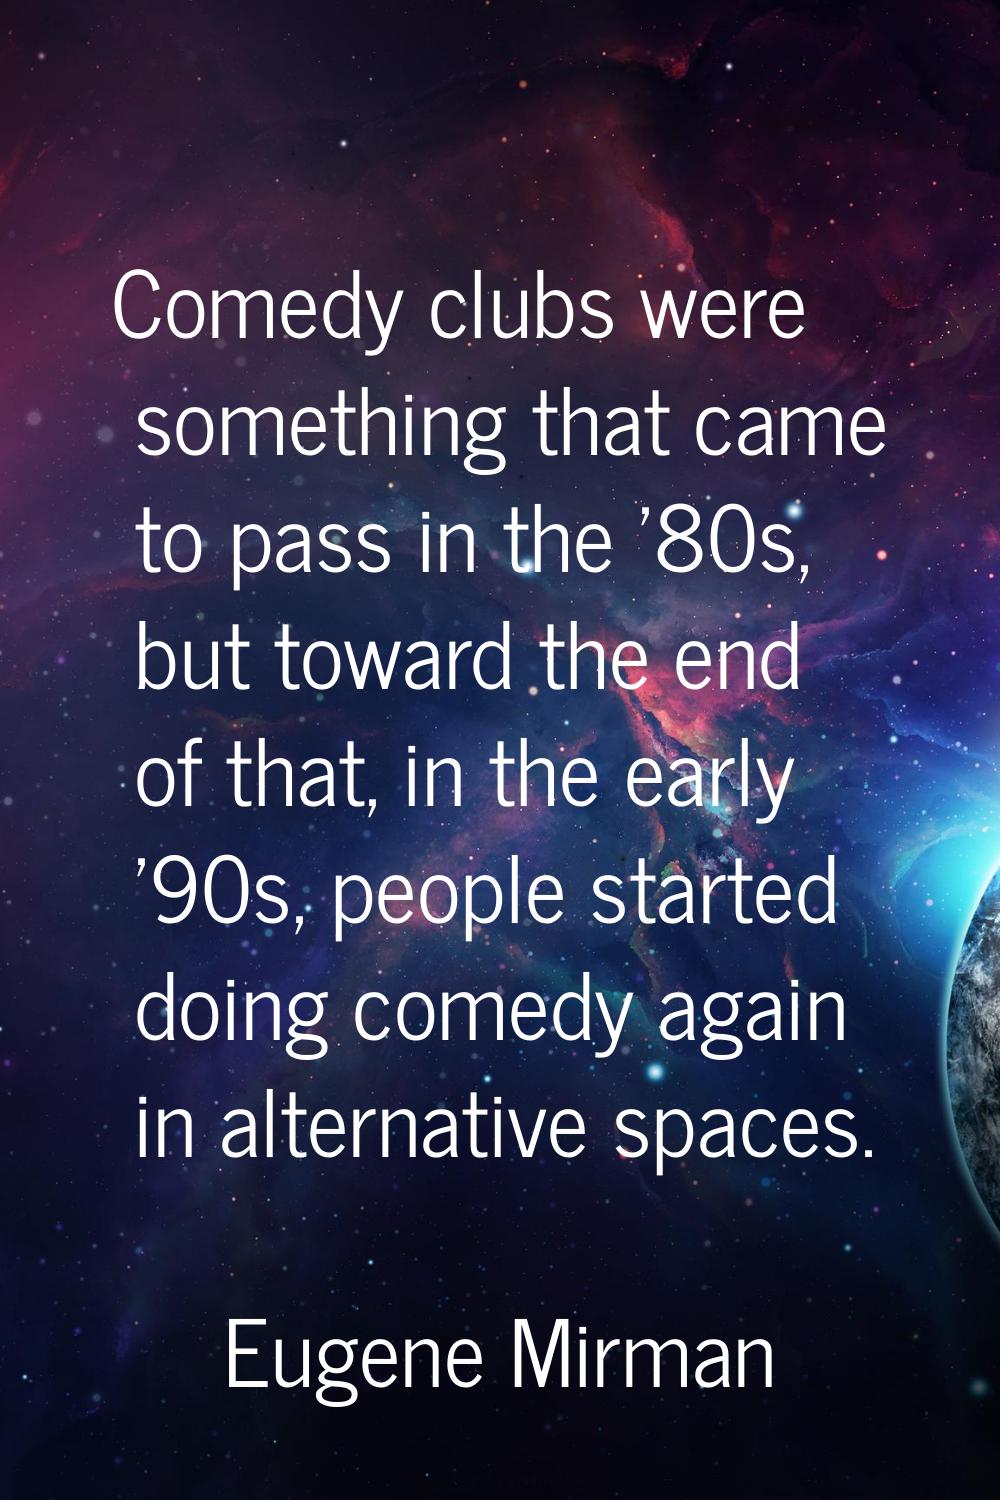 Comedy clubs were something that came to pass in the '80s, but toward the end of that, in the early